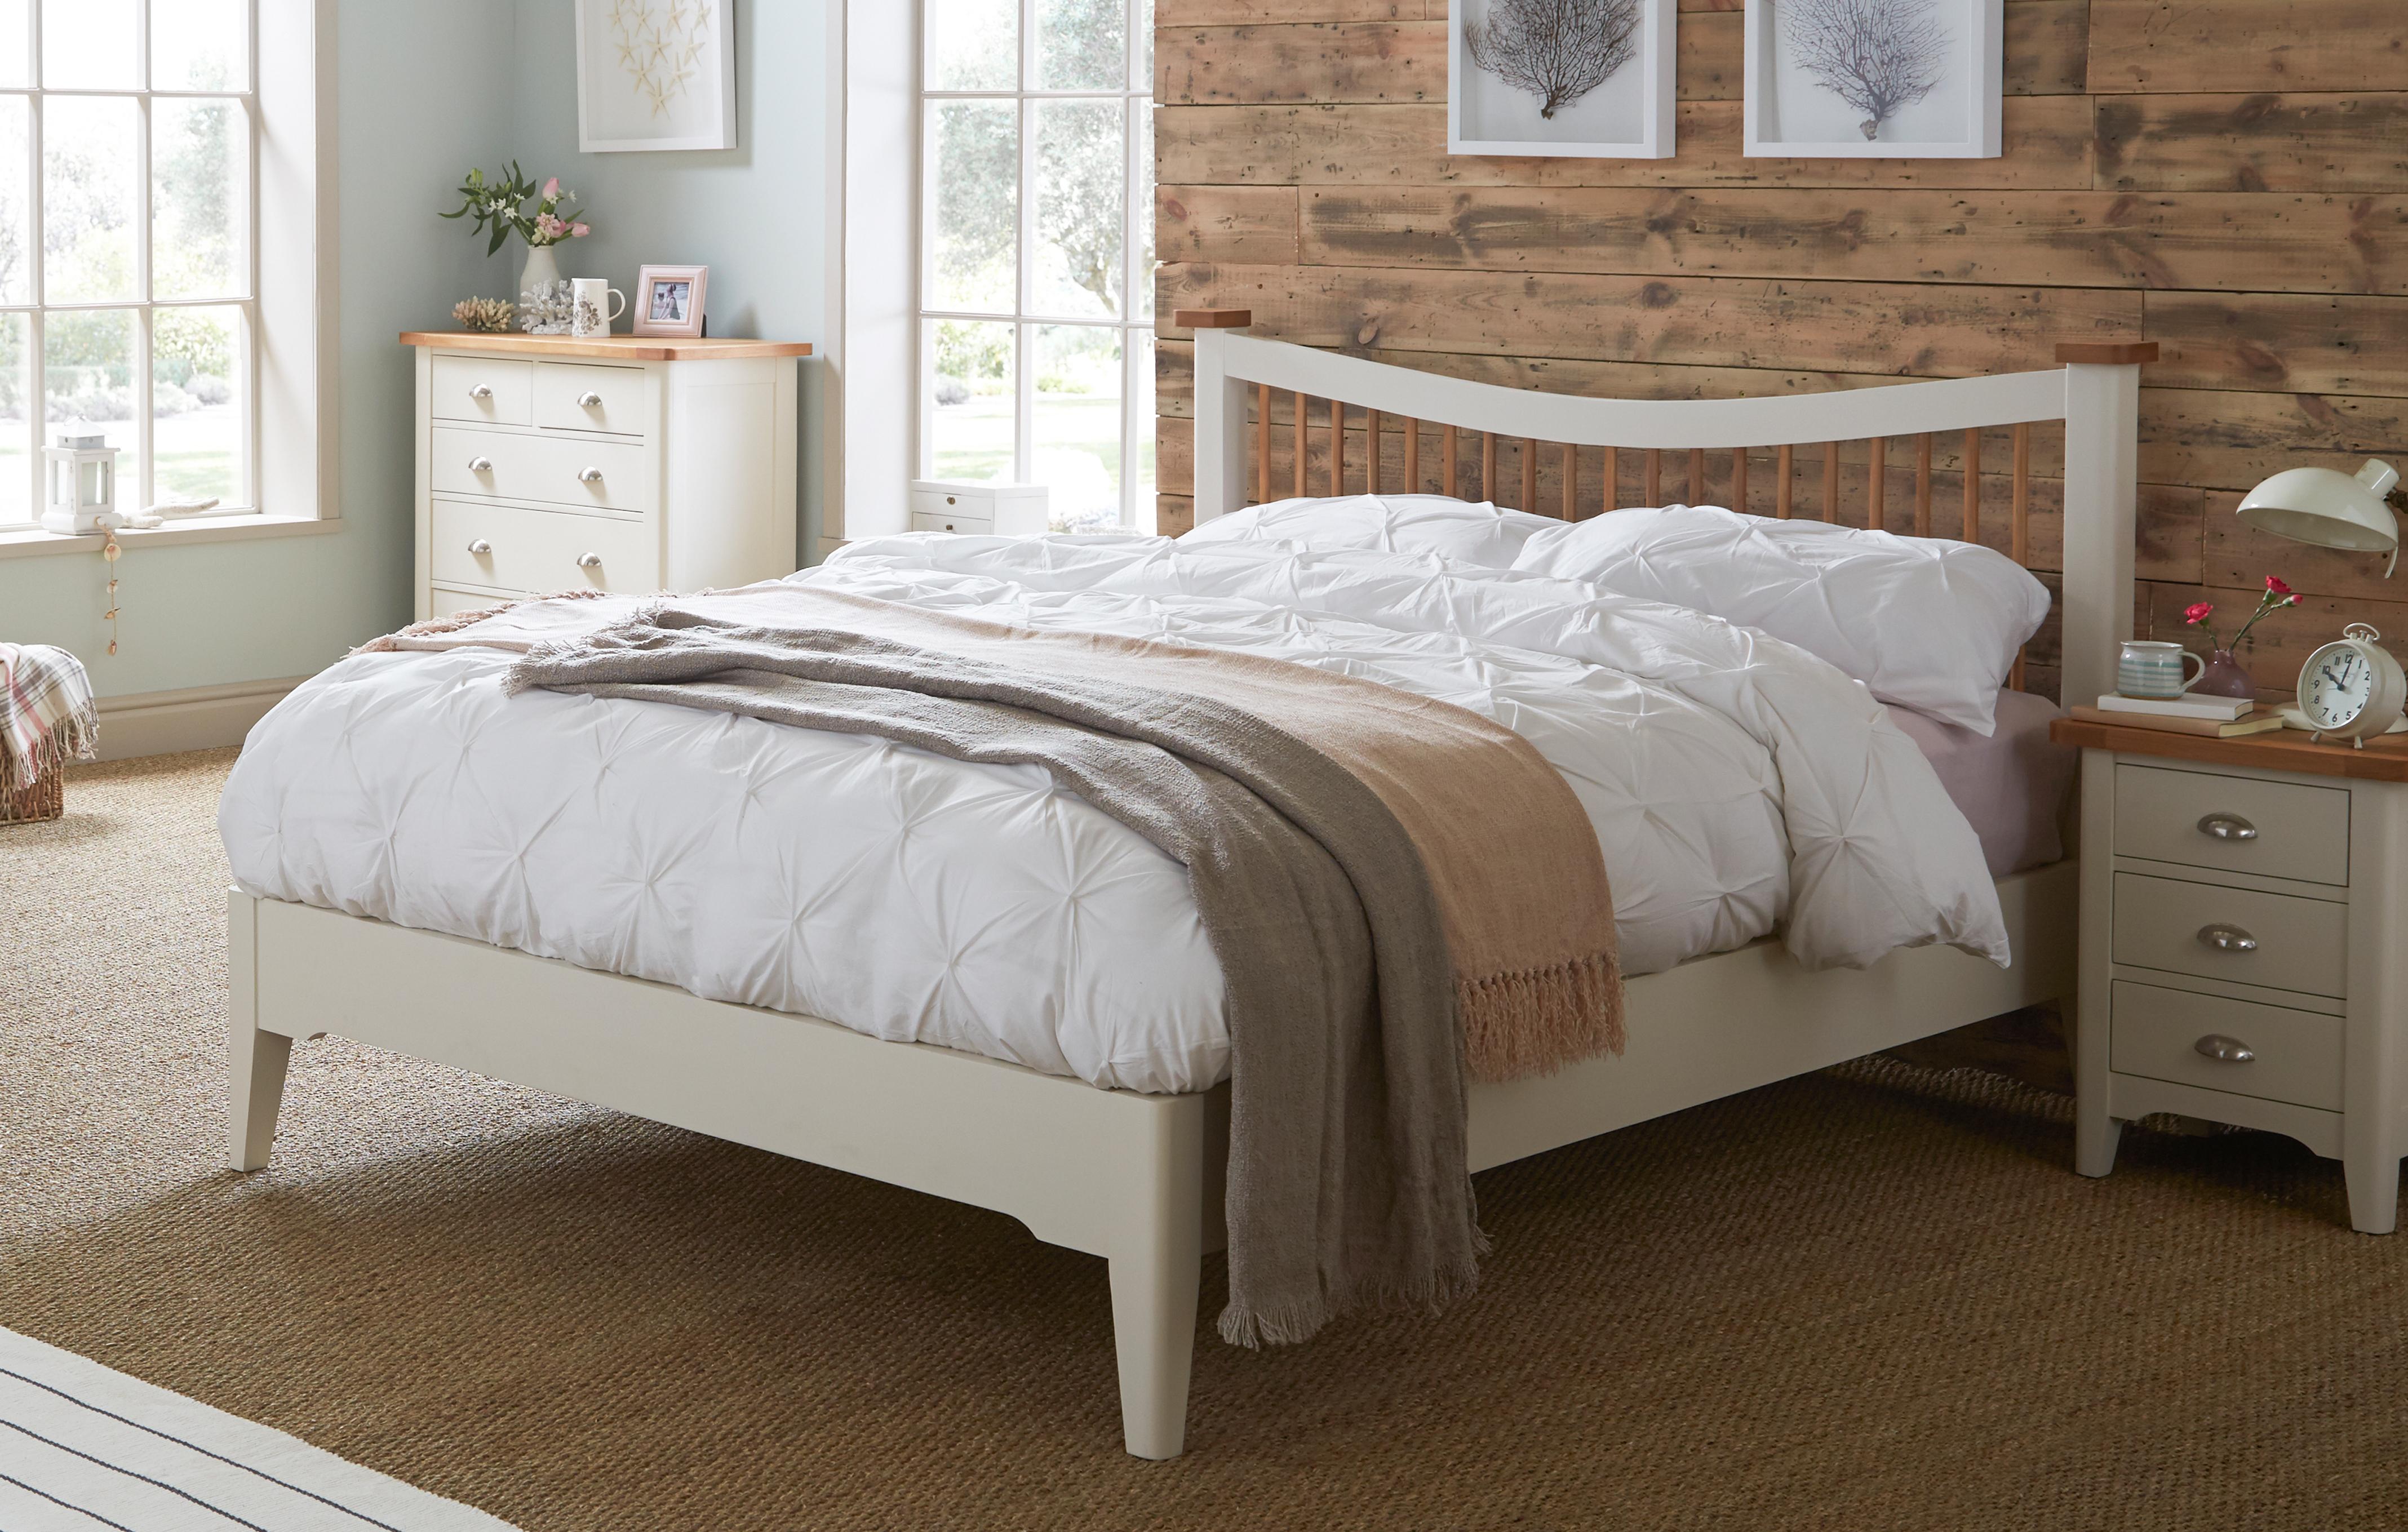 Double beds & mattresses for your bedroom | DFS